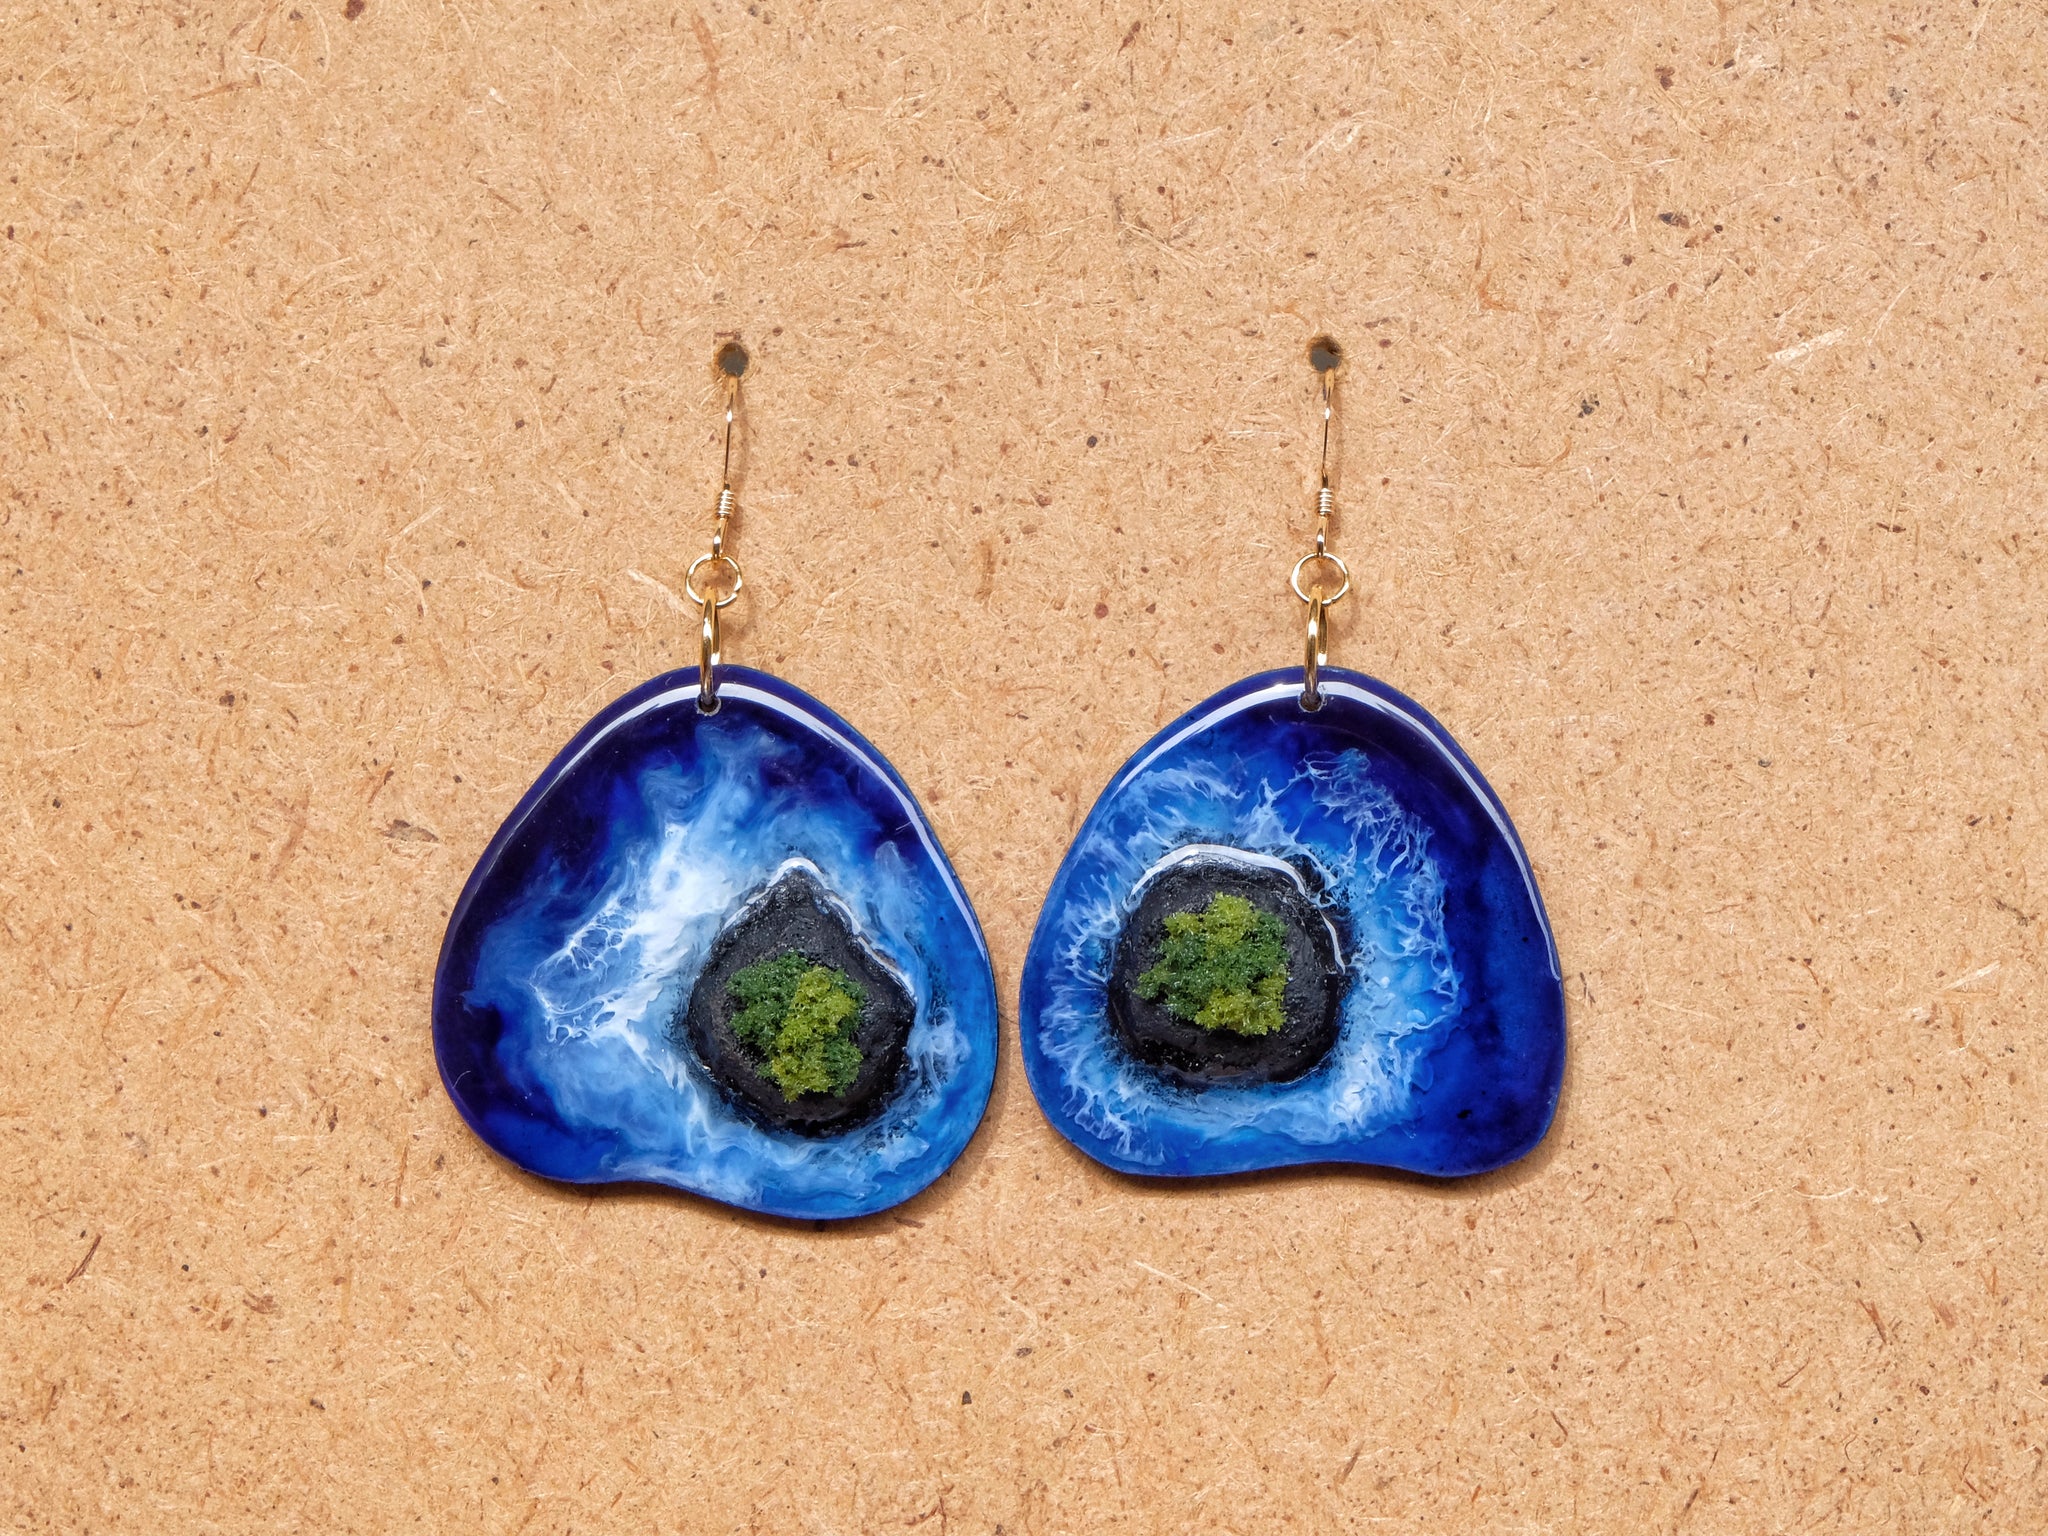 Island Earrings Collection: Blue on Black #3